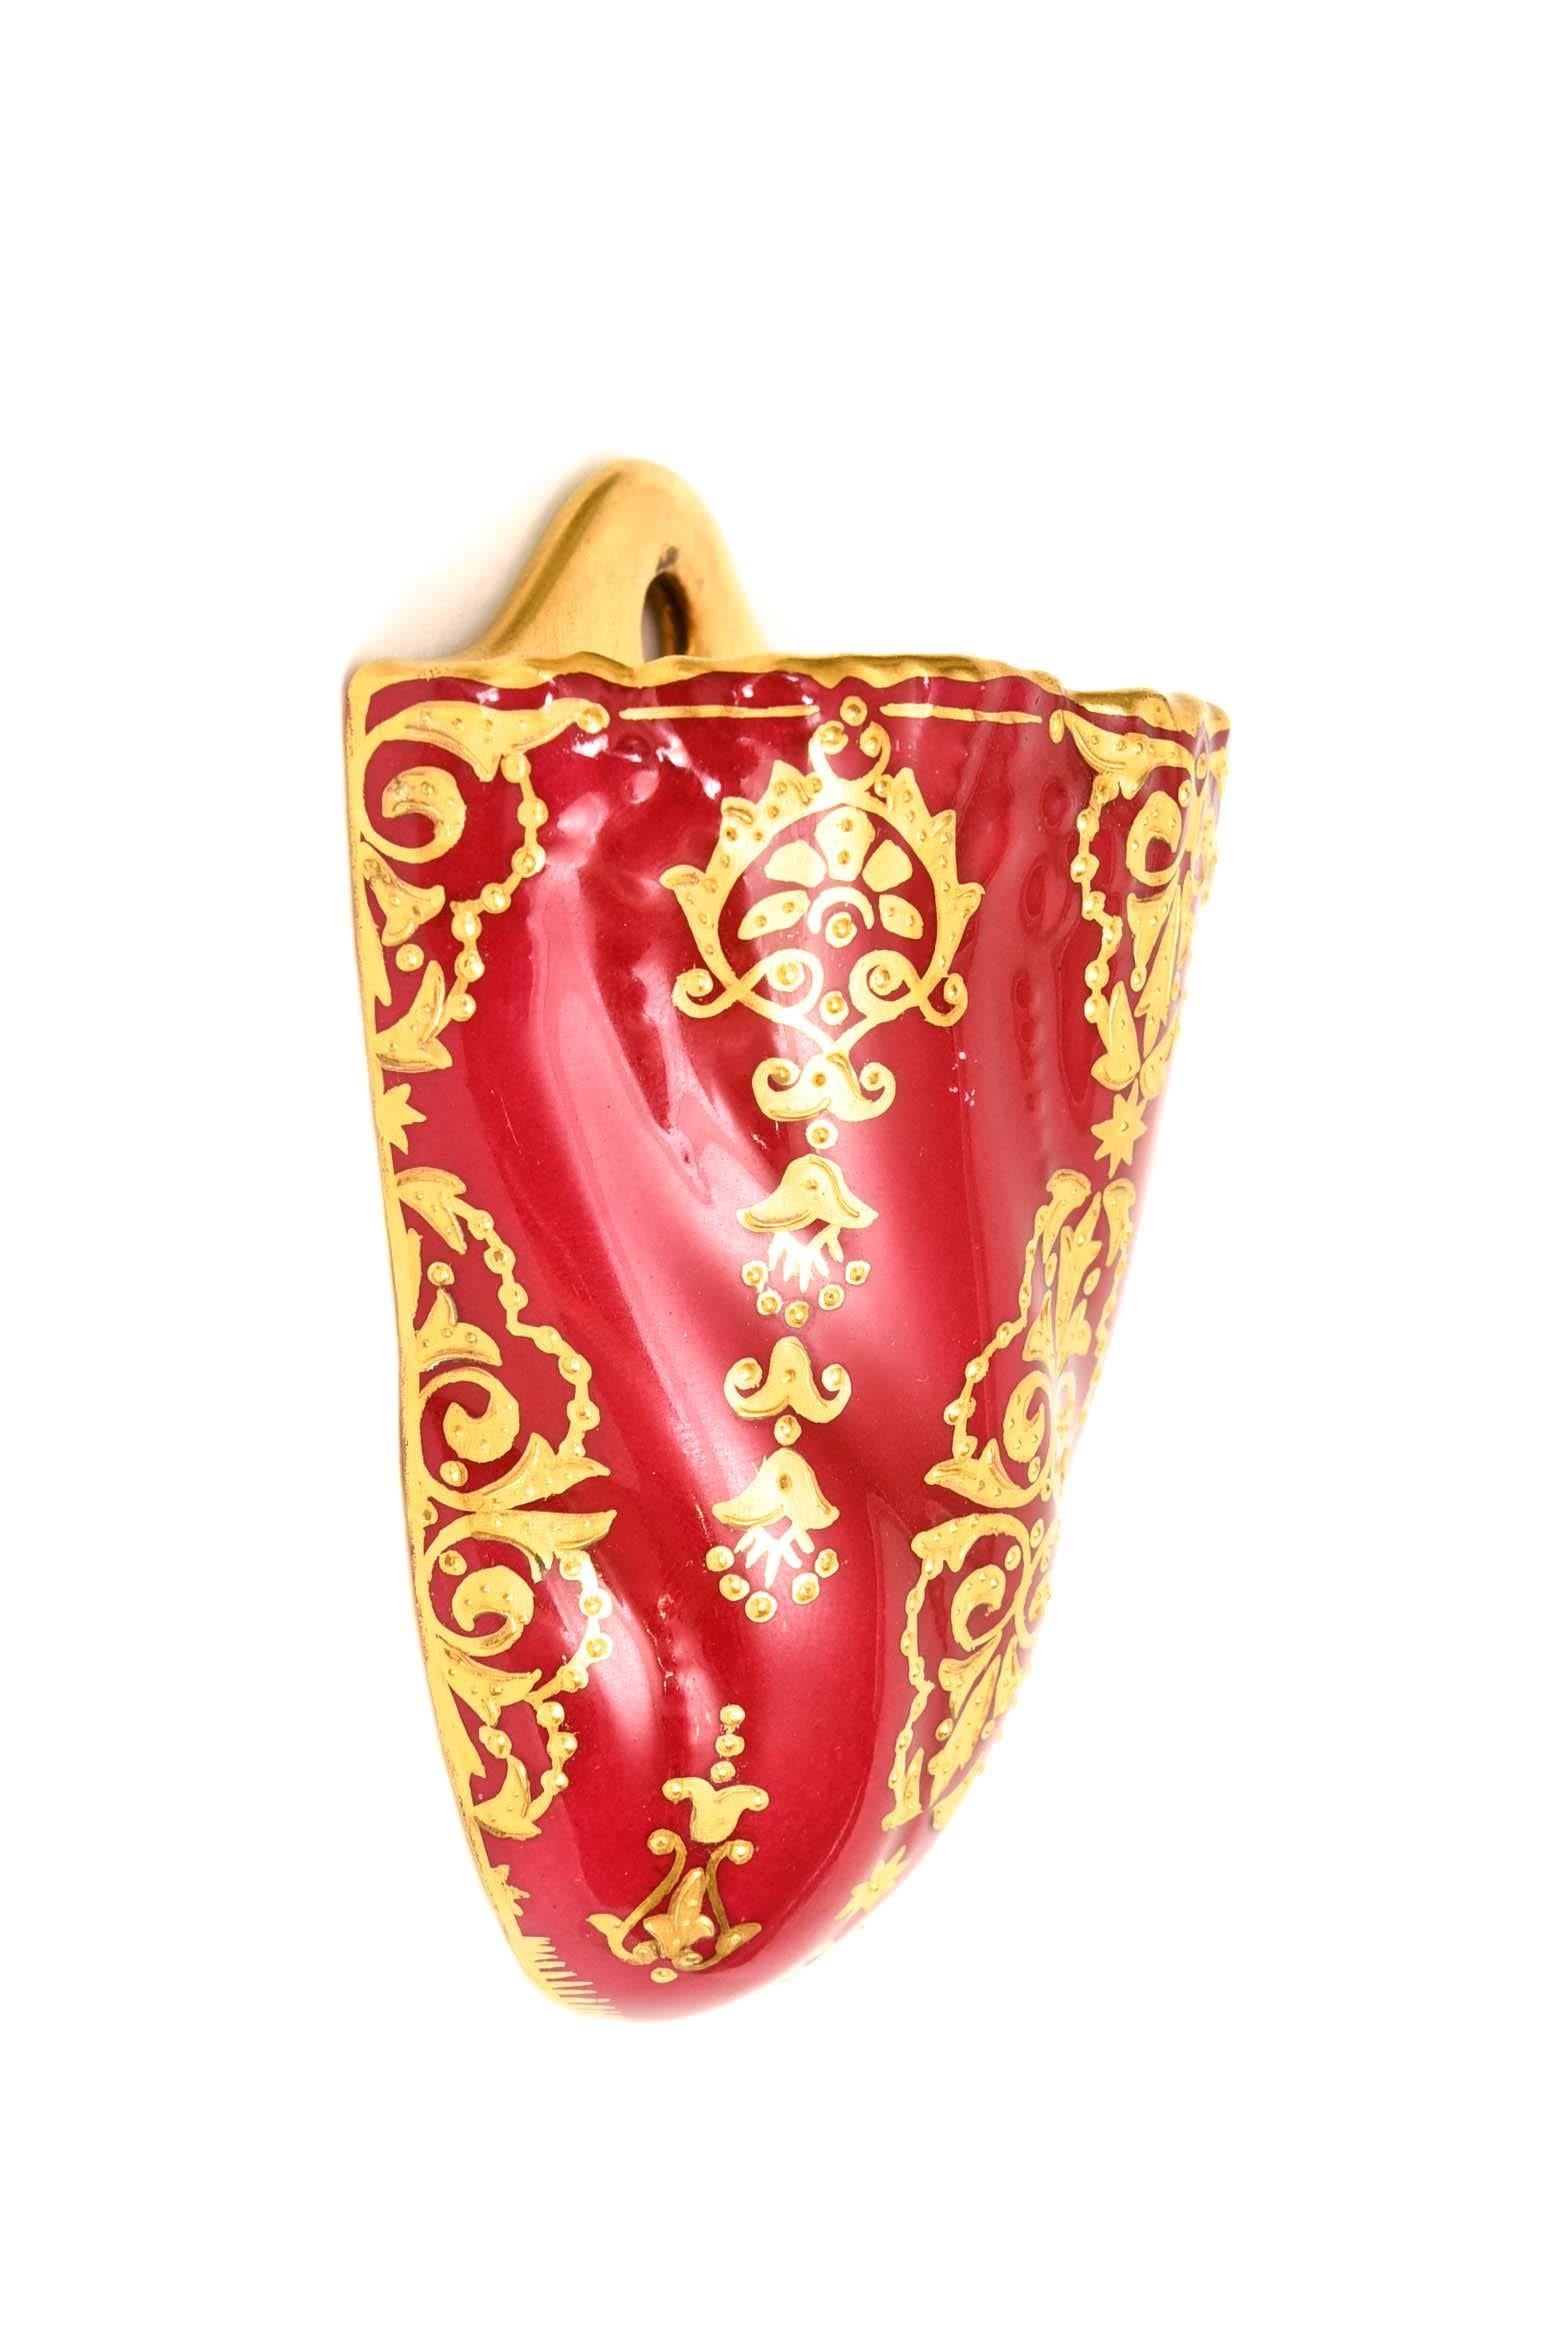 Hand-Painted Charming Wall Pocket by Coalport, England, a Ruby Red and Gilt Encrusted Jem